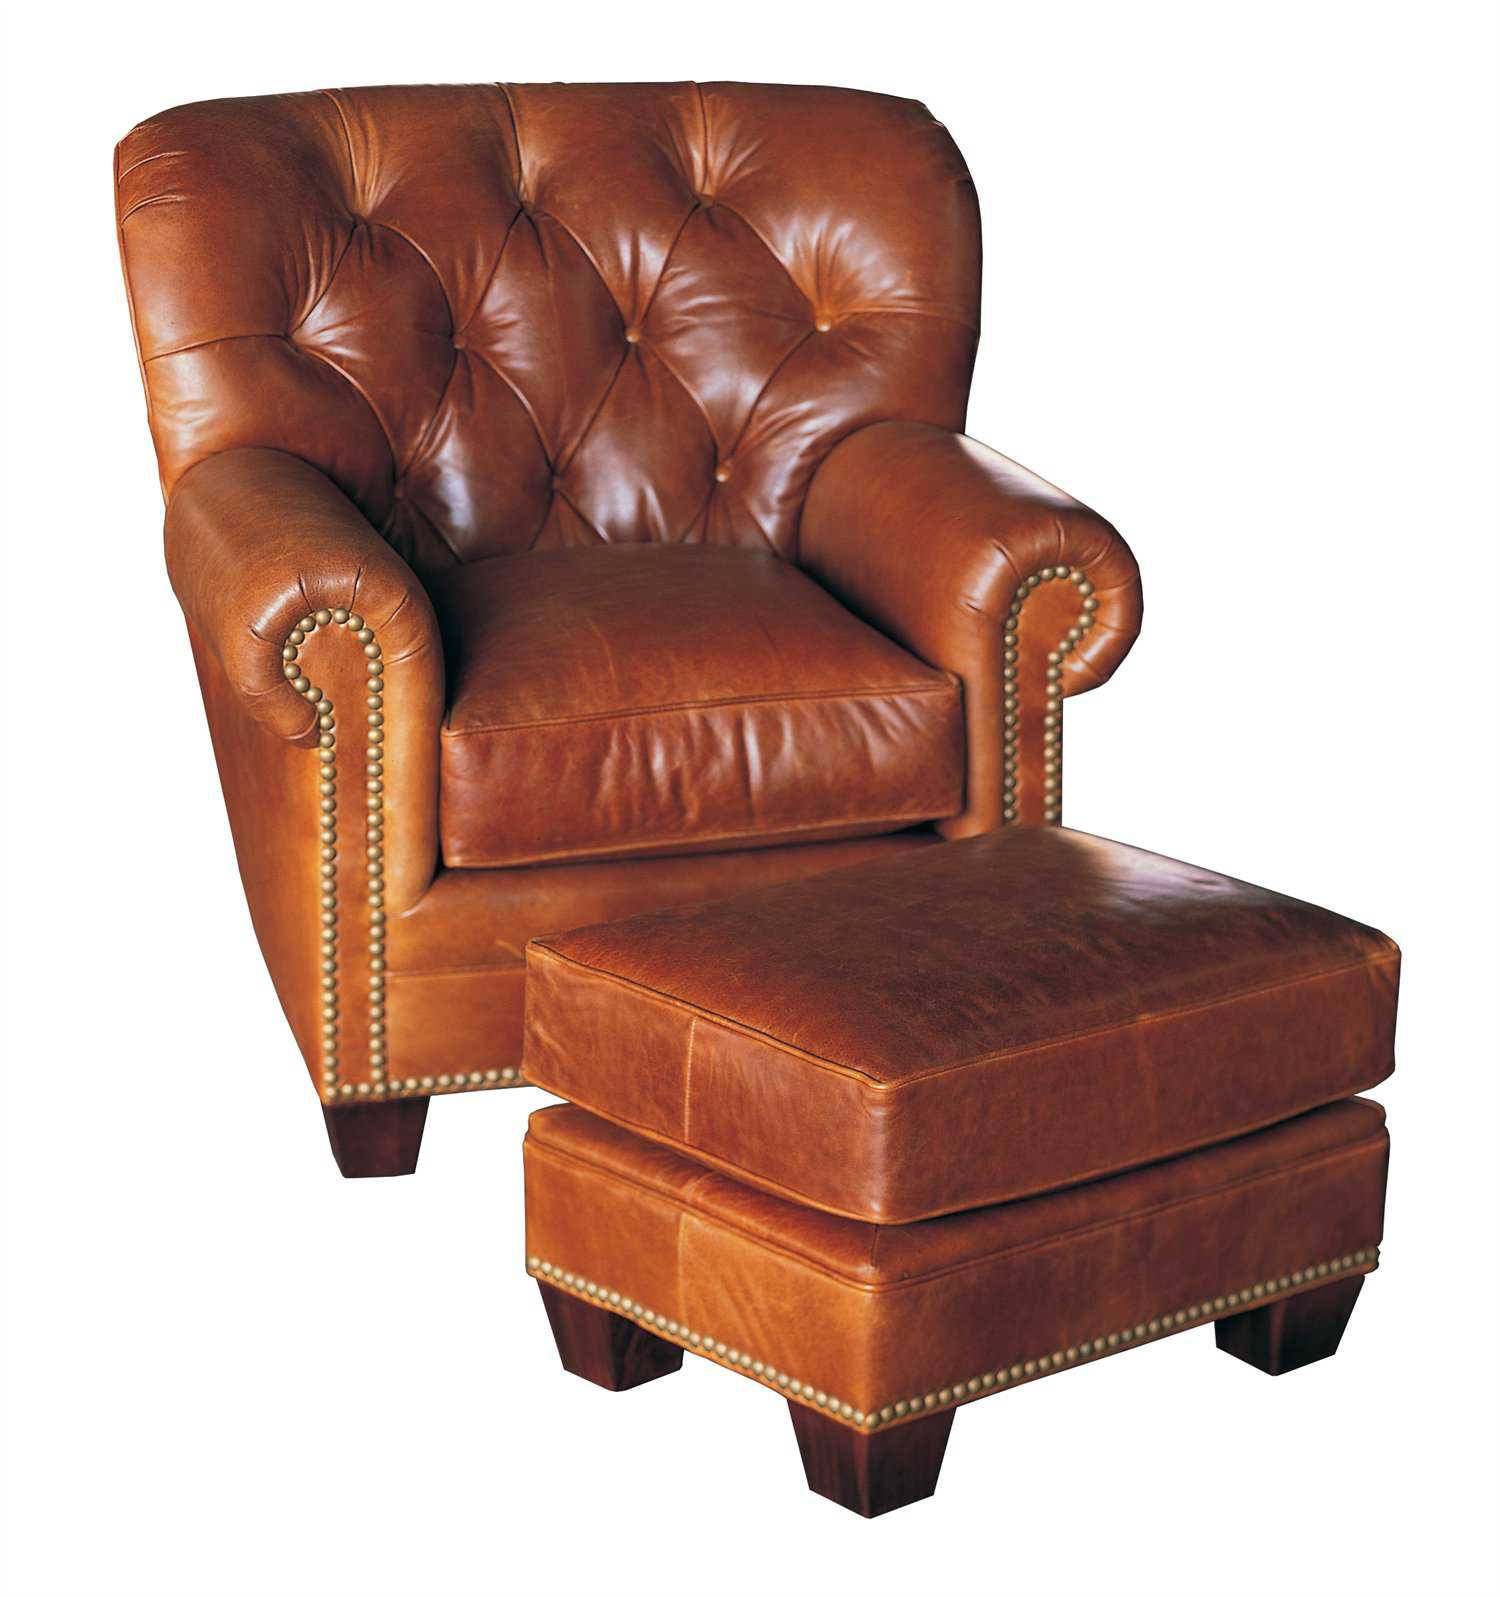 Classic Leather Fireside Club Chair Cl117786 Zm 